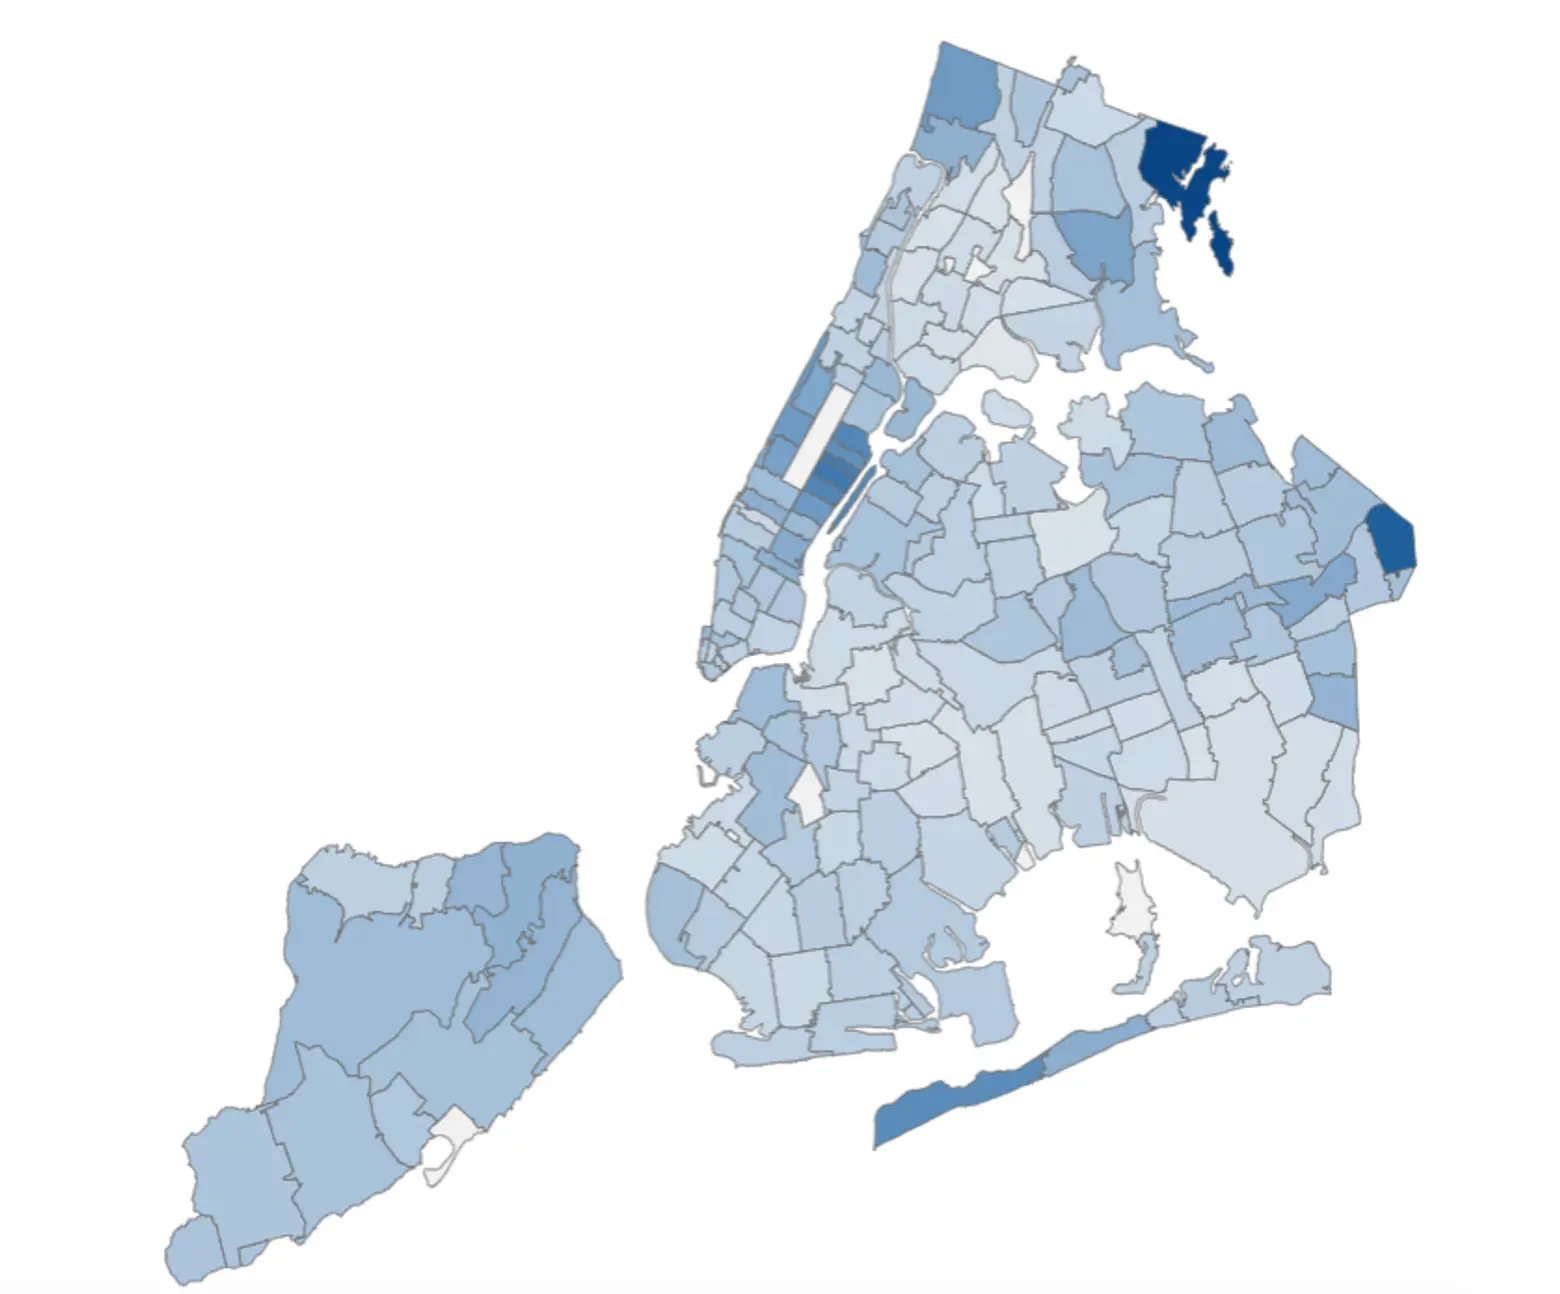 NYC releases vaccination data by ZIP code